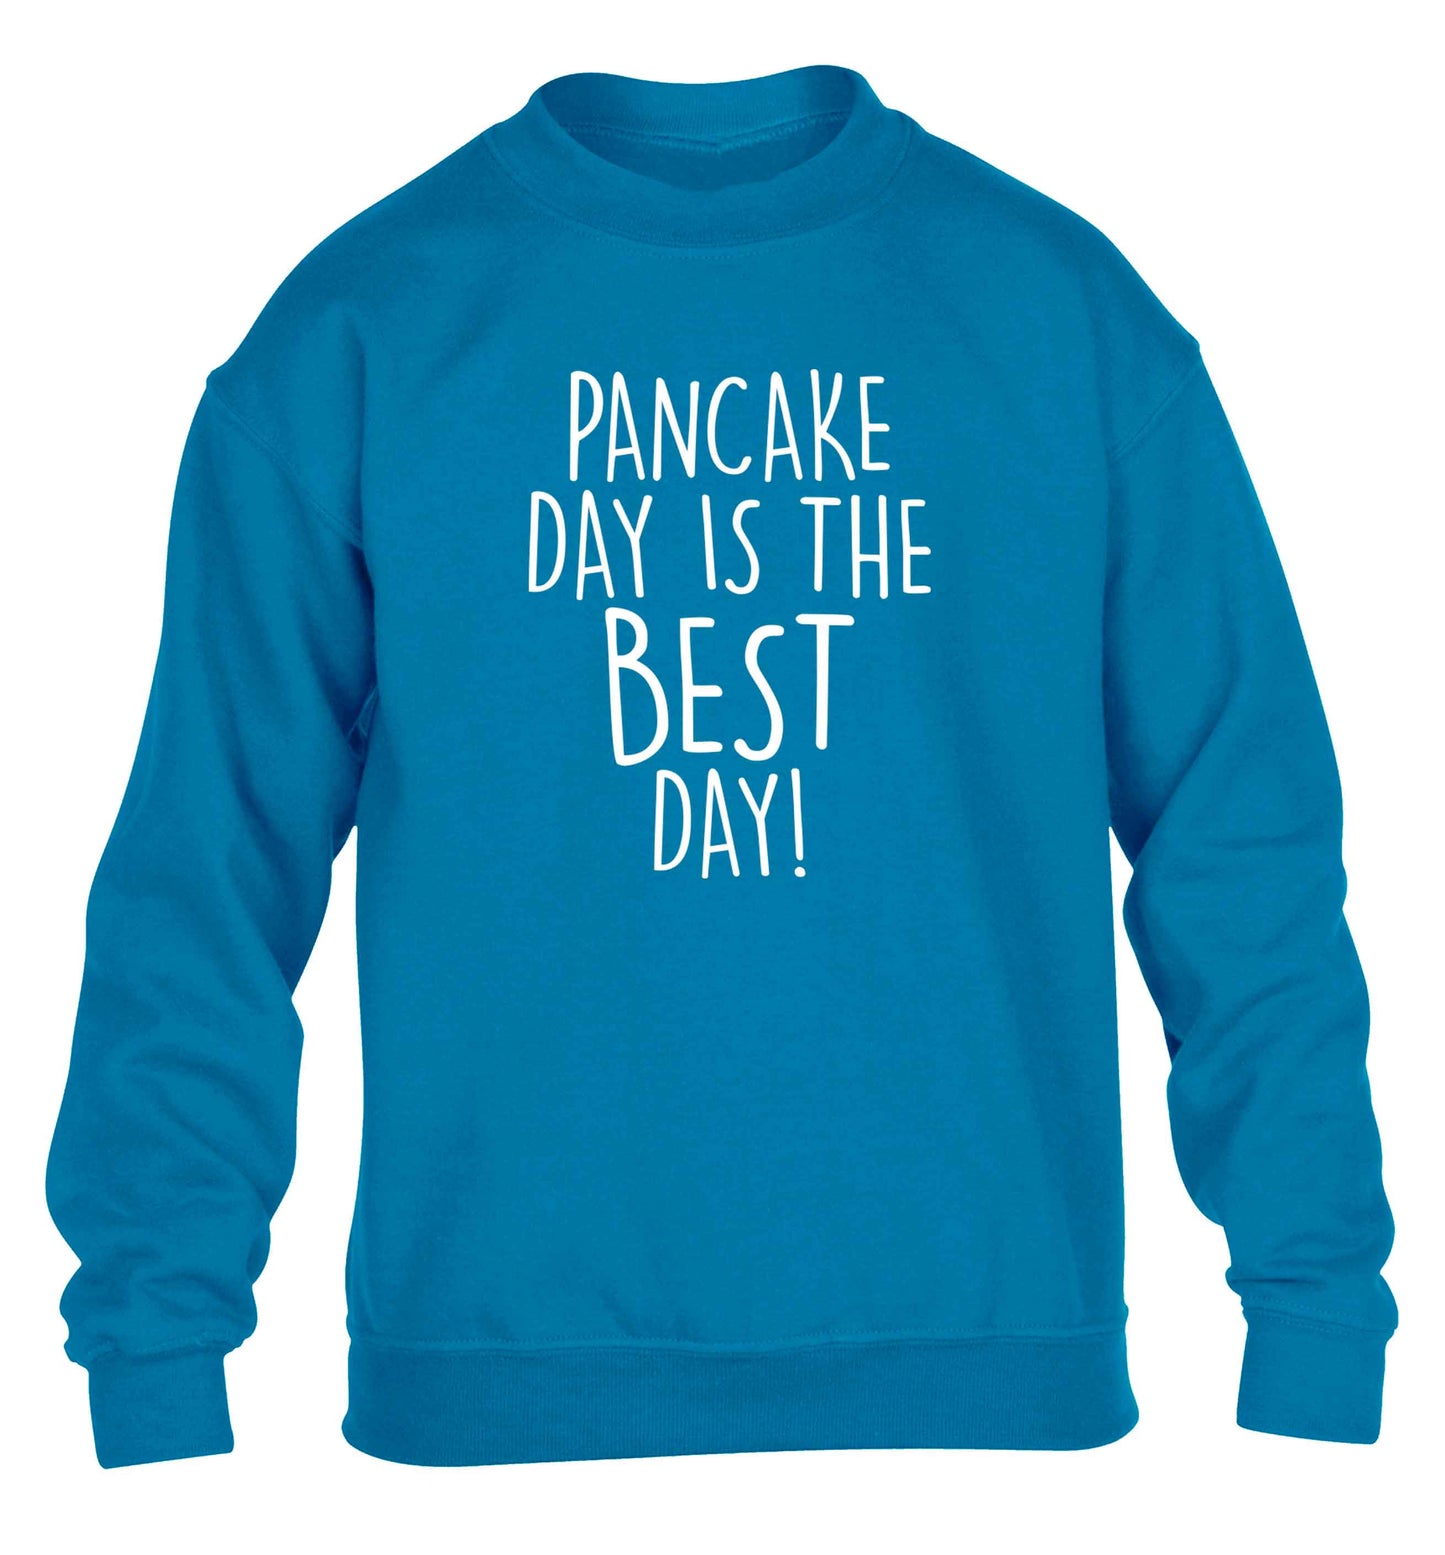 Pancake day is the best day children's blue sweater 12-13 Years